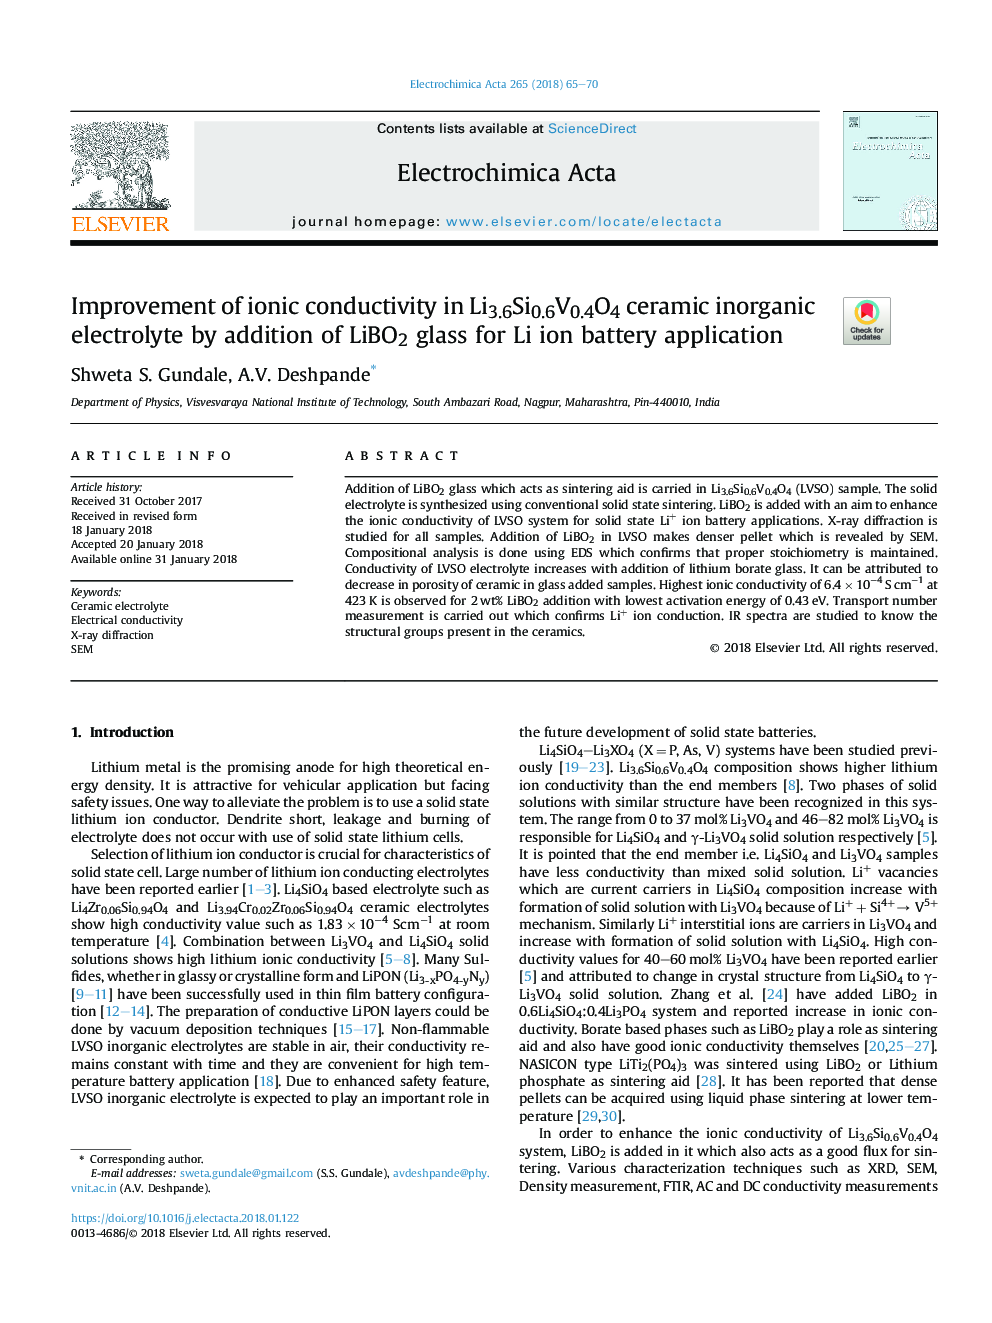 Improvement of ionic conductivity in Li3.6Si0.6V0.4O4 ceramic inorganic electrolyte by addition of LiBO2 glass for Li ion battery application